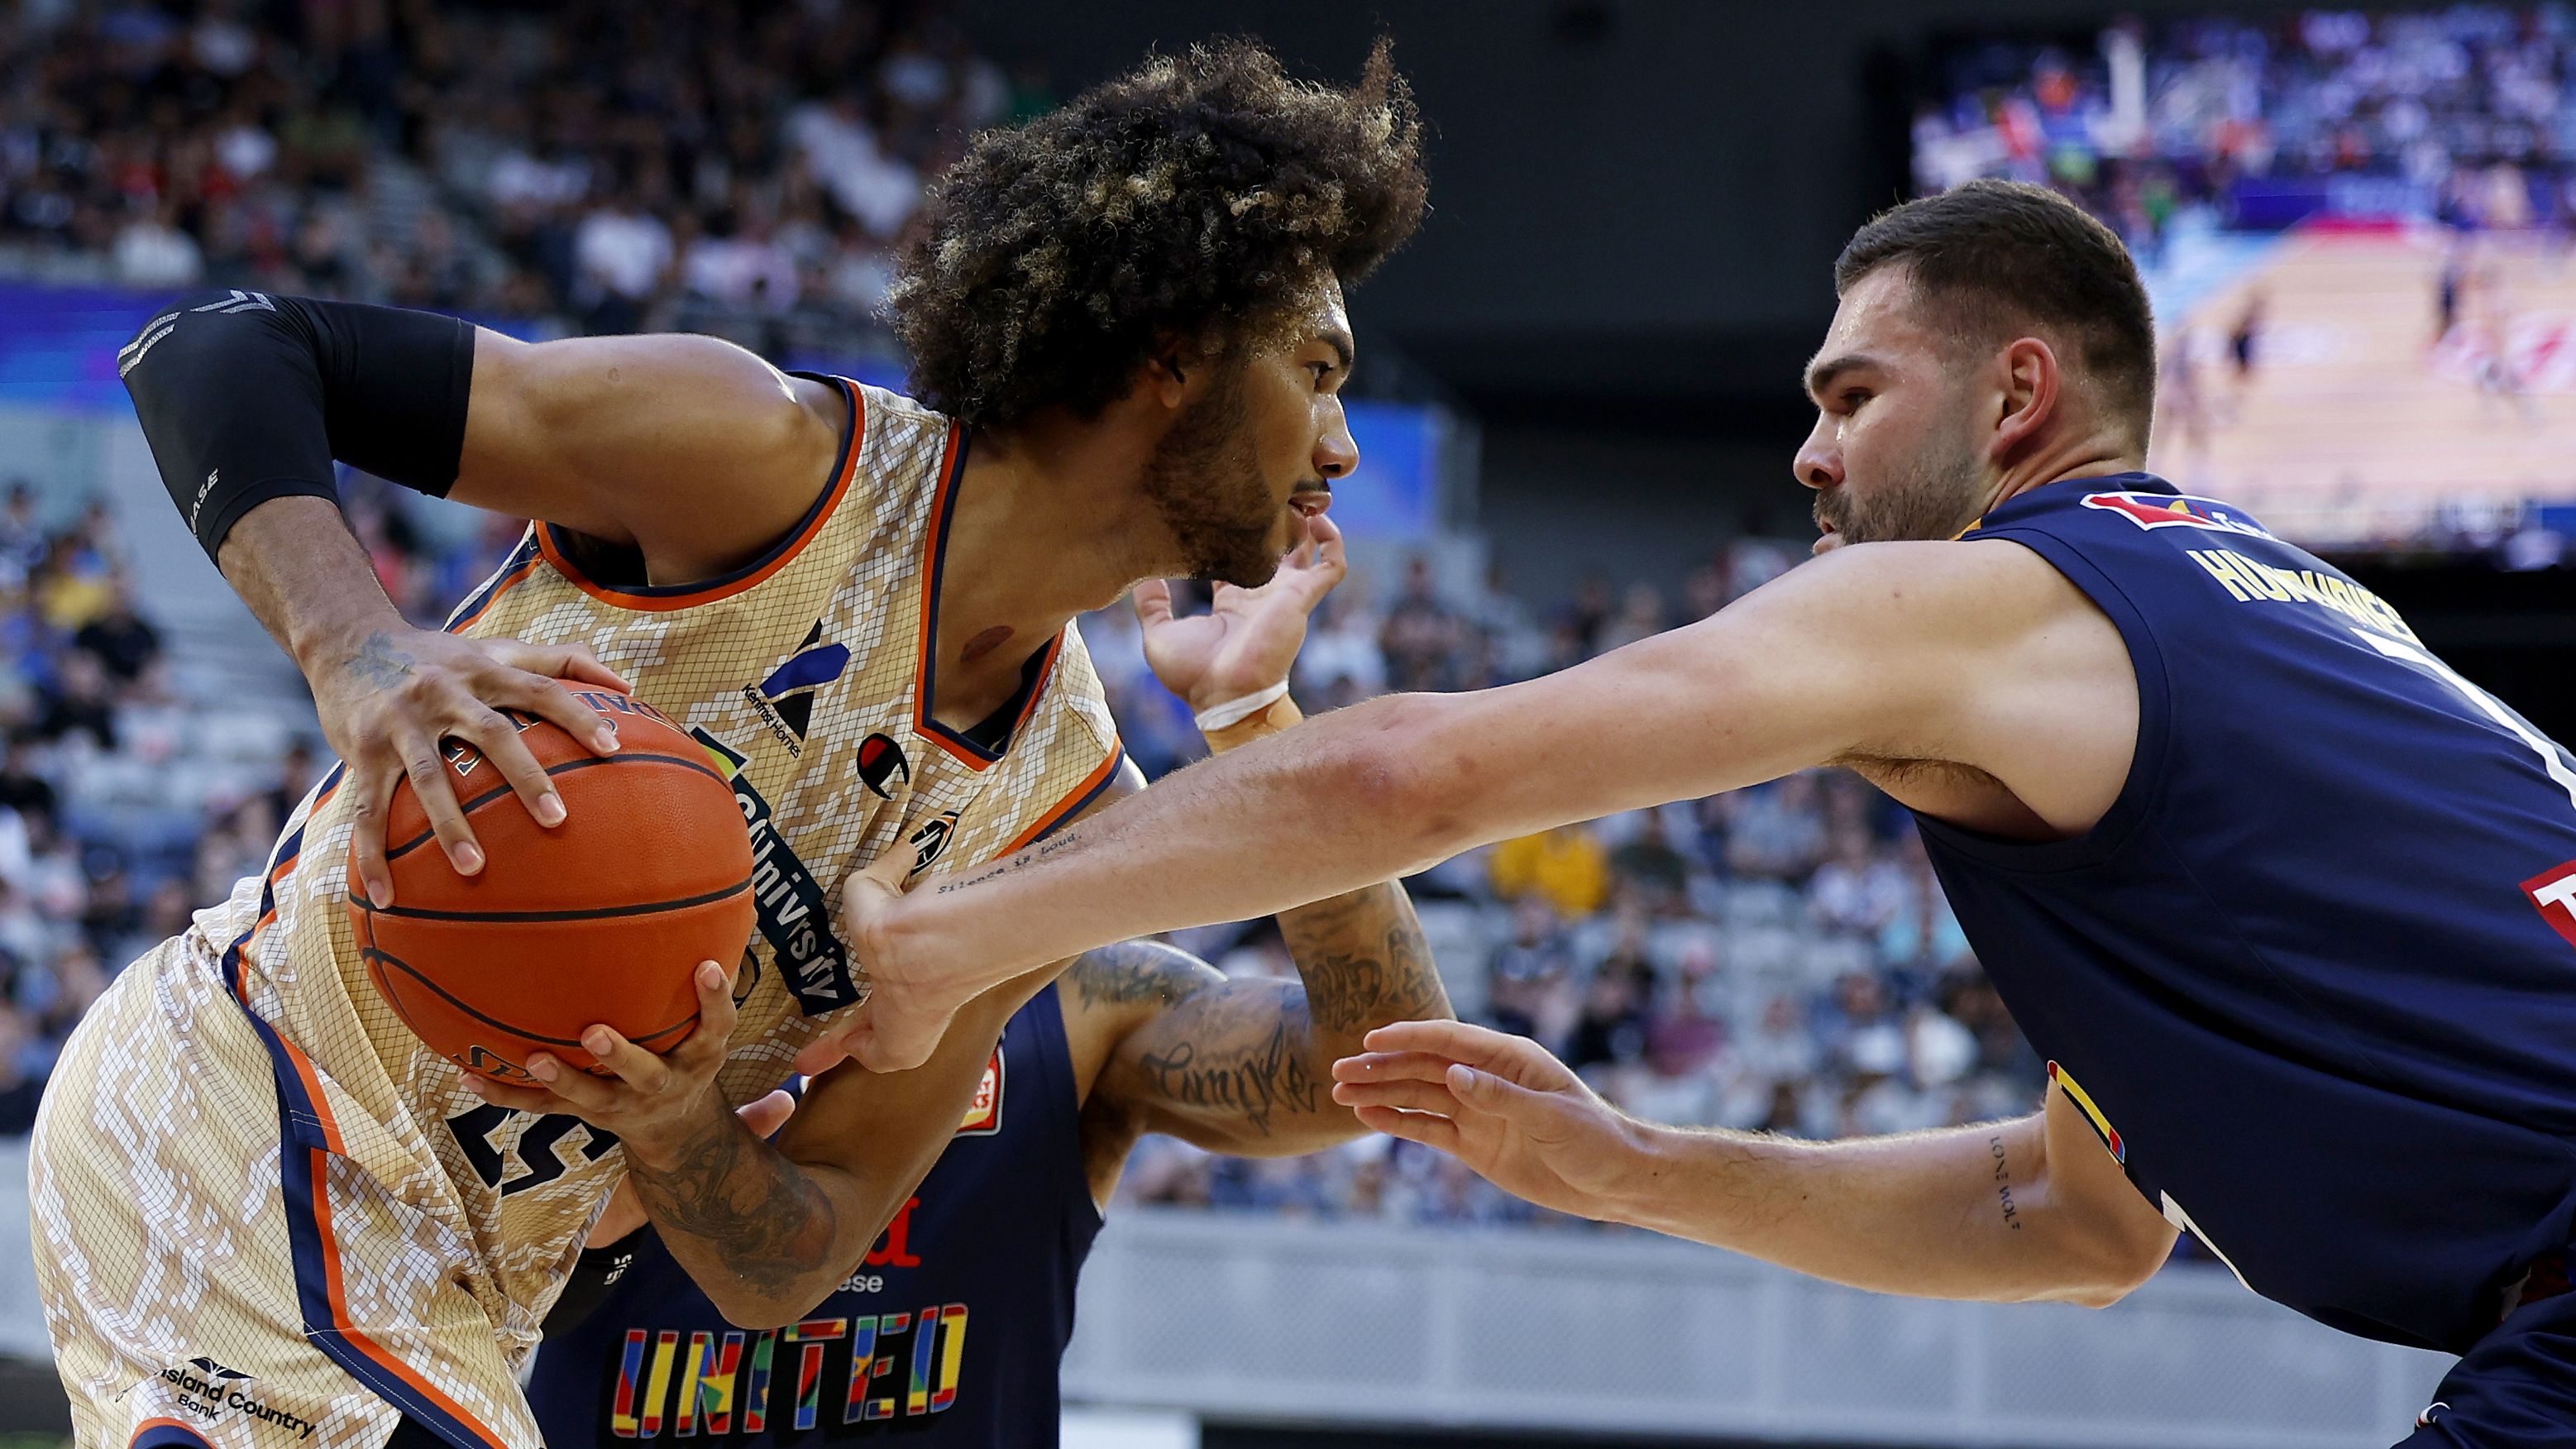 MELBOURNE, AUSTRALIA - DECEMBER 23: Keanu Pinder of the Taipans in action during the round 12 NBL match between Melbourne United and Cairns Taipans at John Cain Arena, on December 23, 2022, in Melbourne, Australia. (Photo by Jonathan DiMaggio/Getty Images)